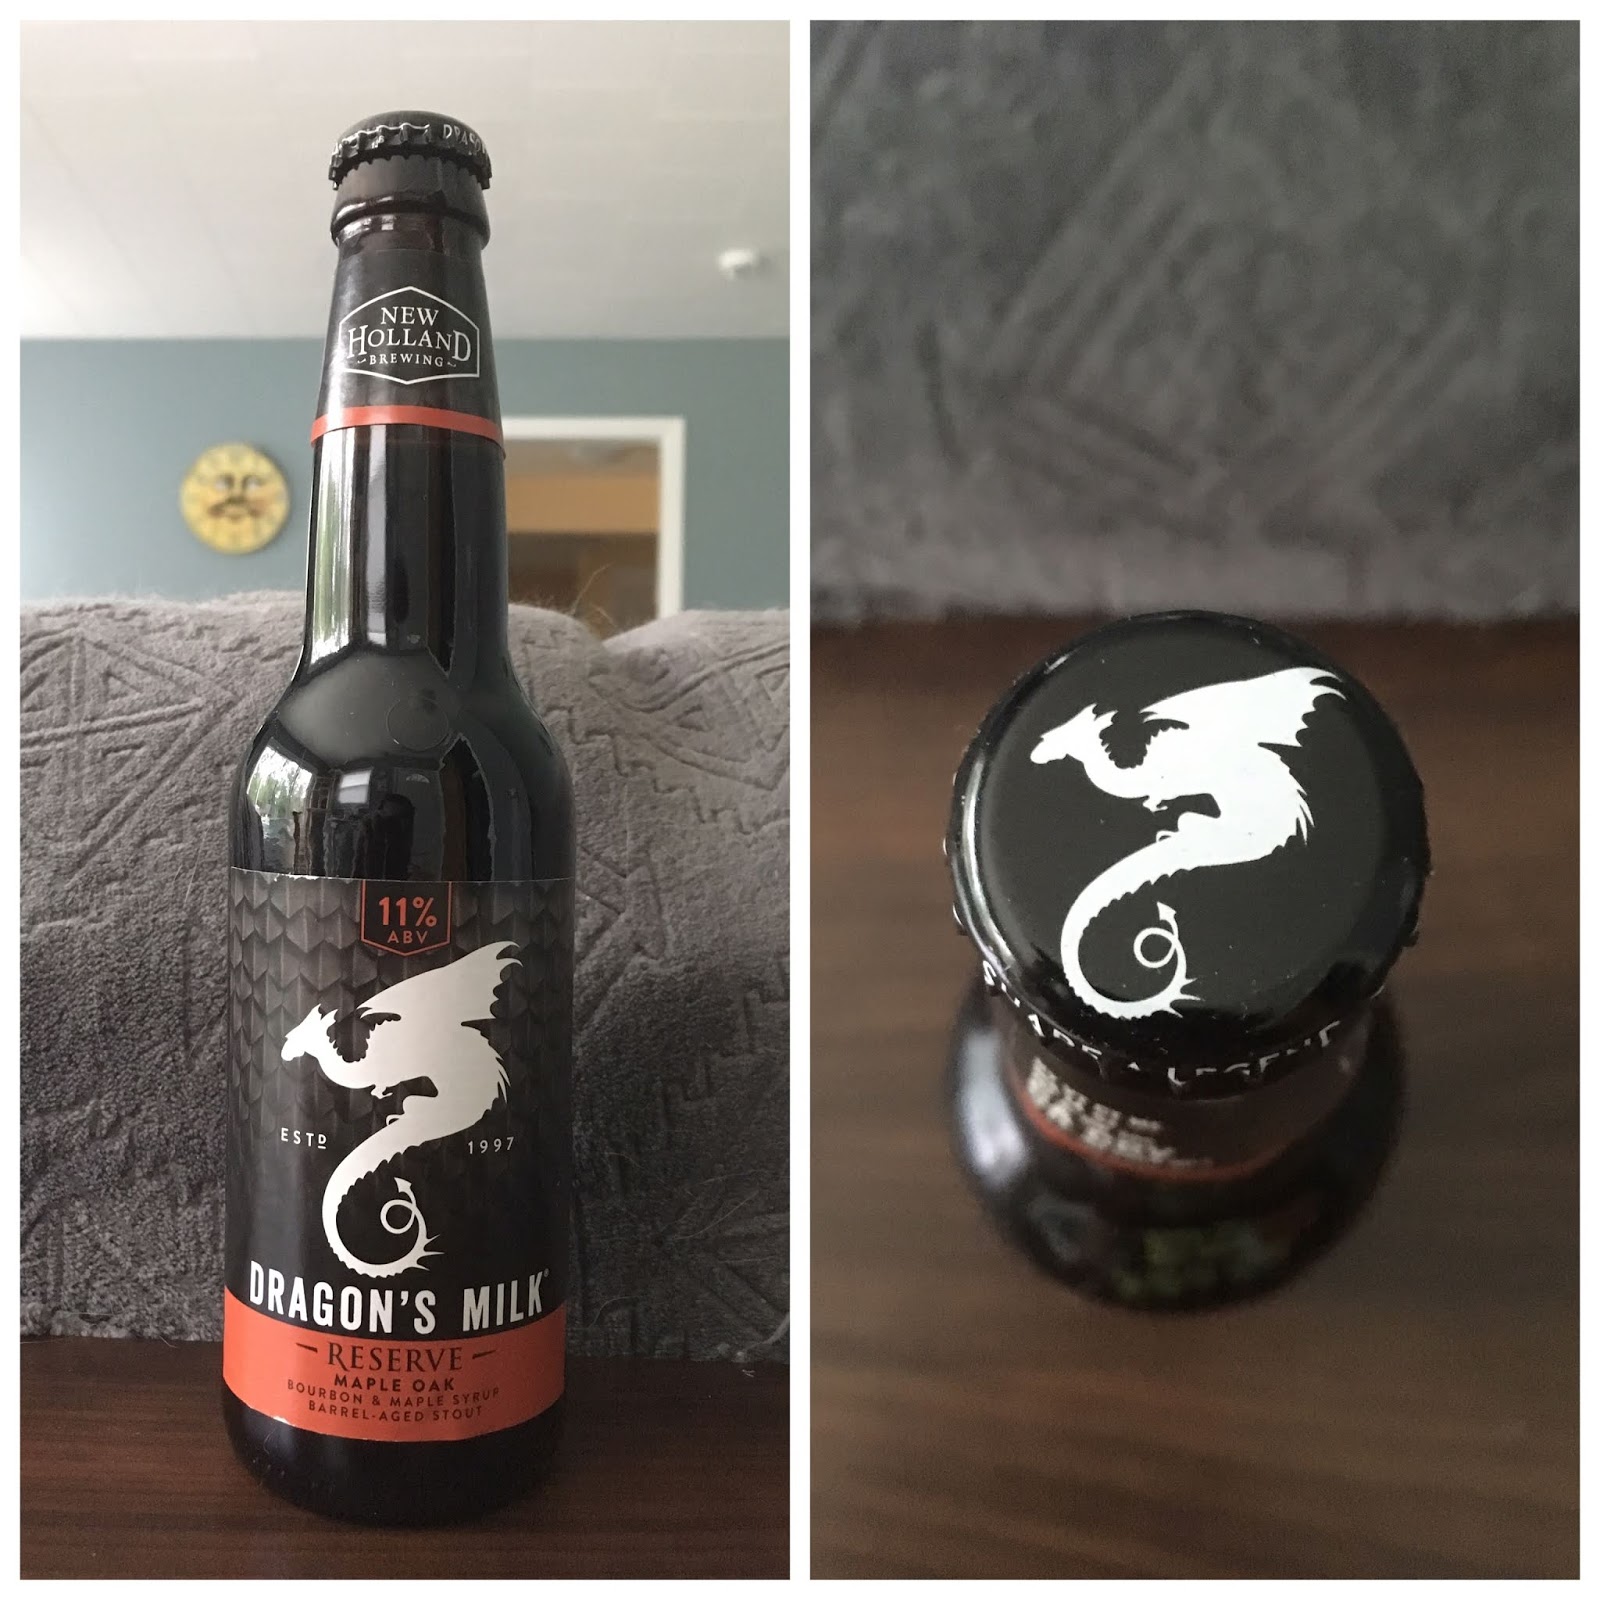 John S Beer Blog 7 4 19 New Holland Brewing S Dragon S Milk Reserve Maple Oak A Post For Pip